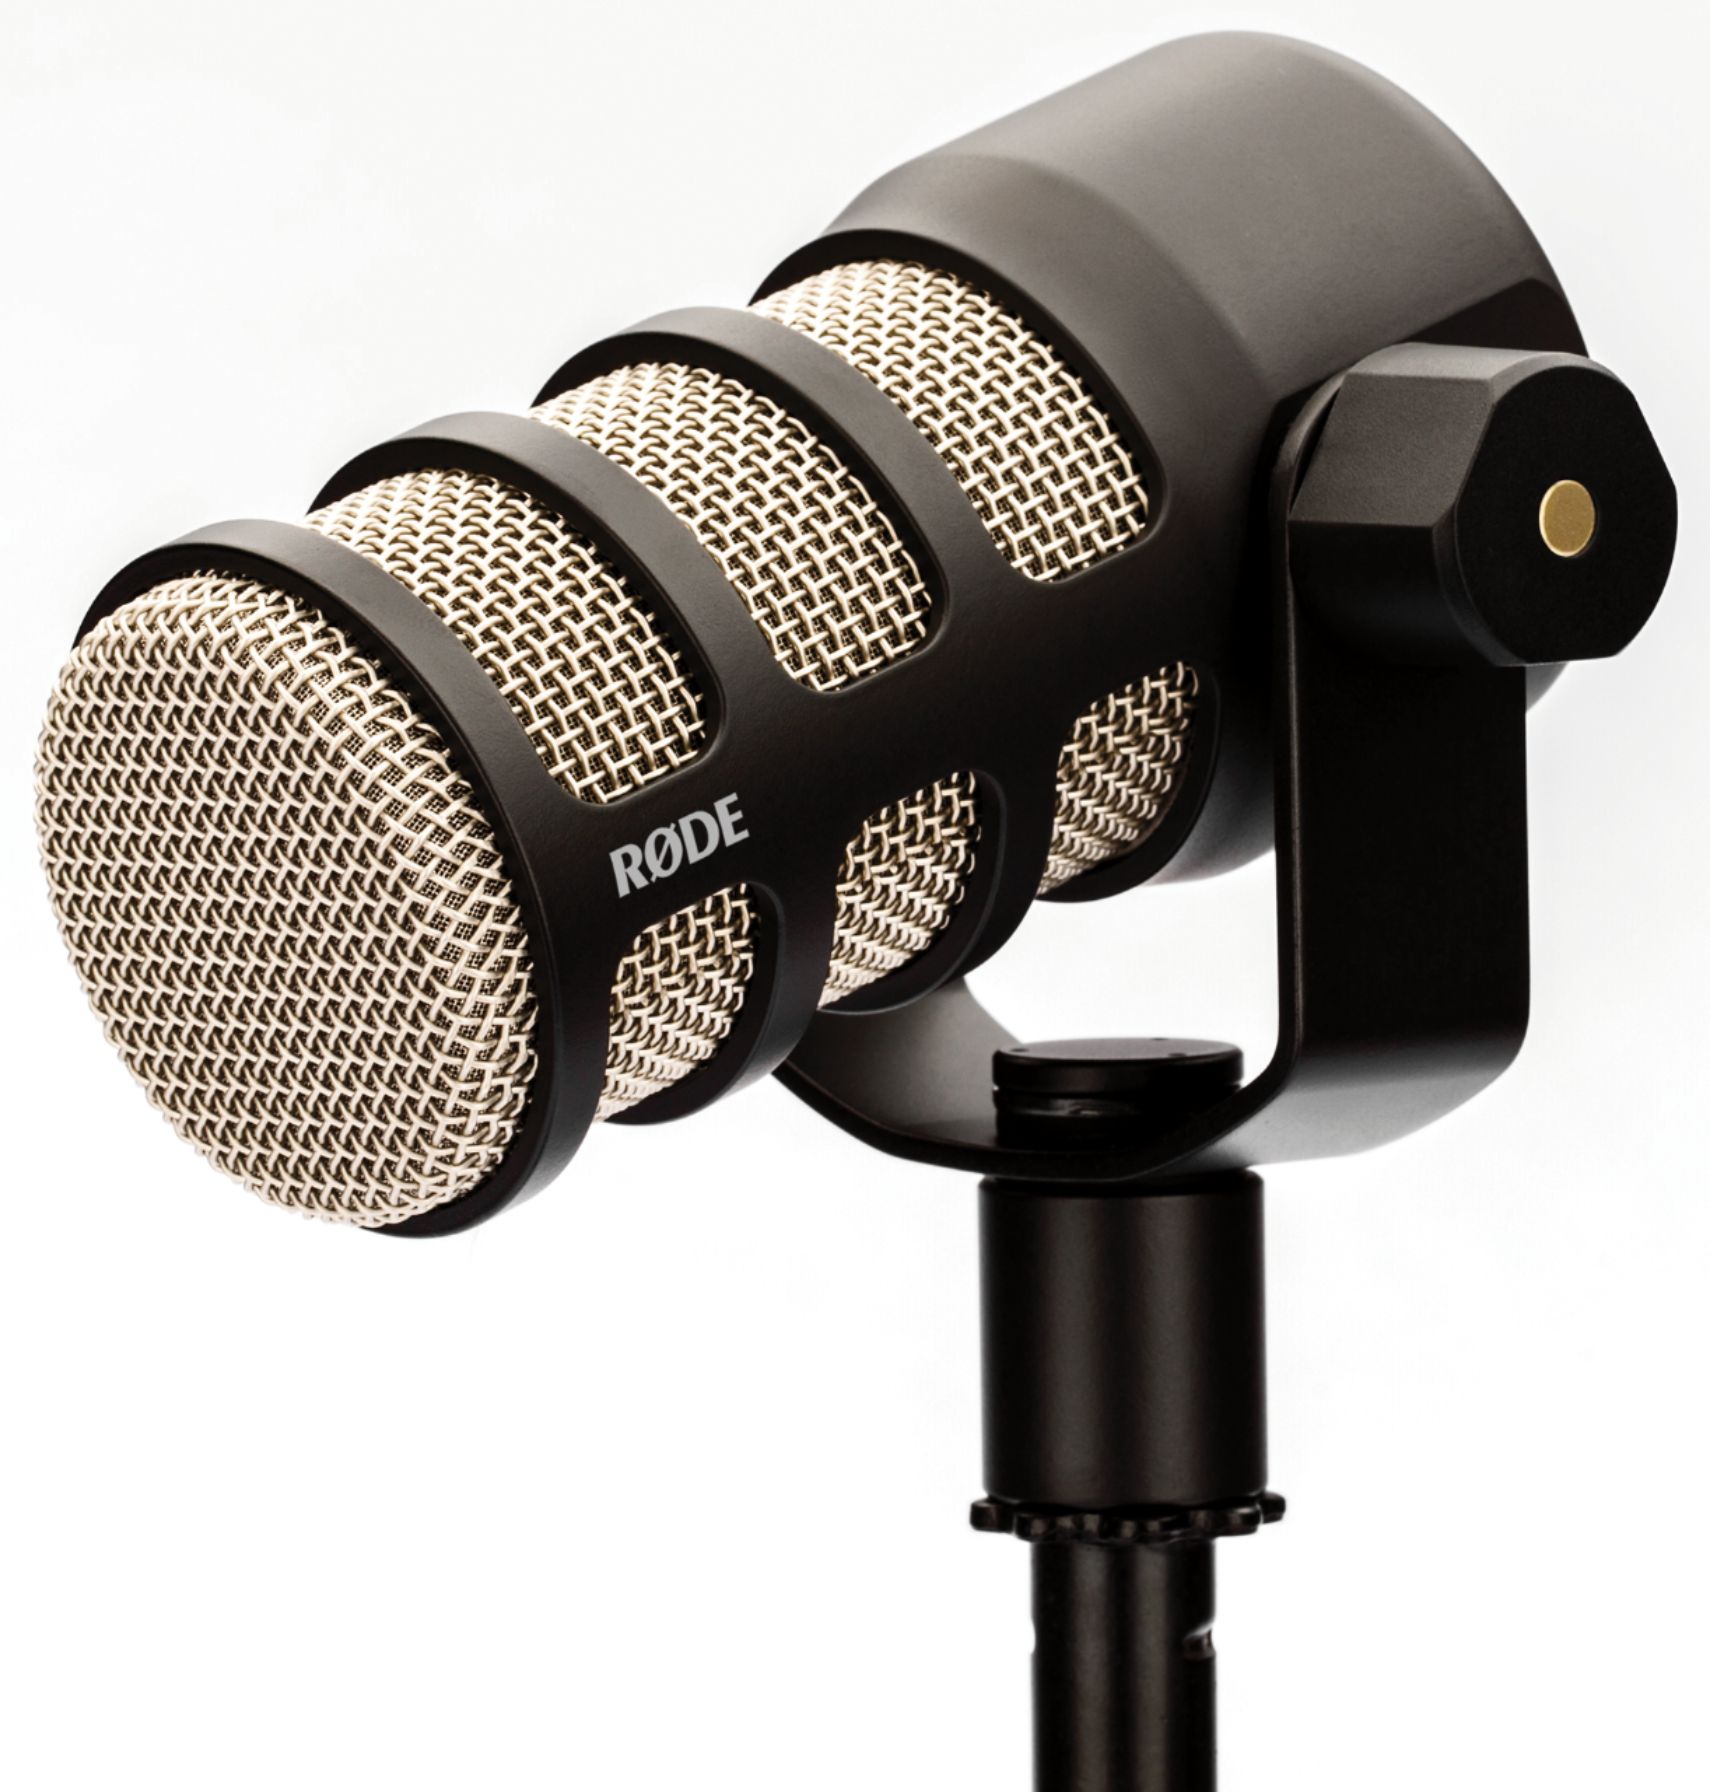 Elgato Wave DX XLR Microphone Review: Affordable, Full-Bodied Sound